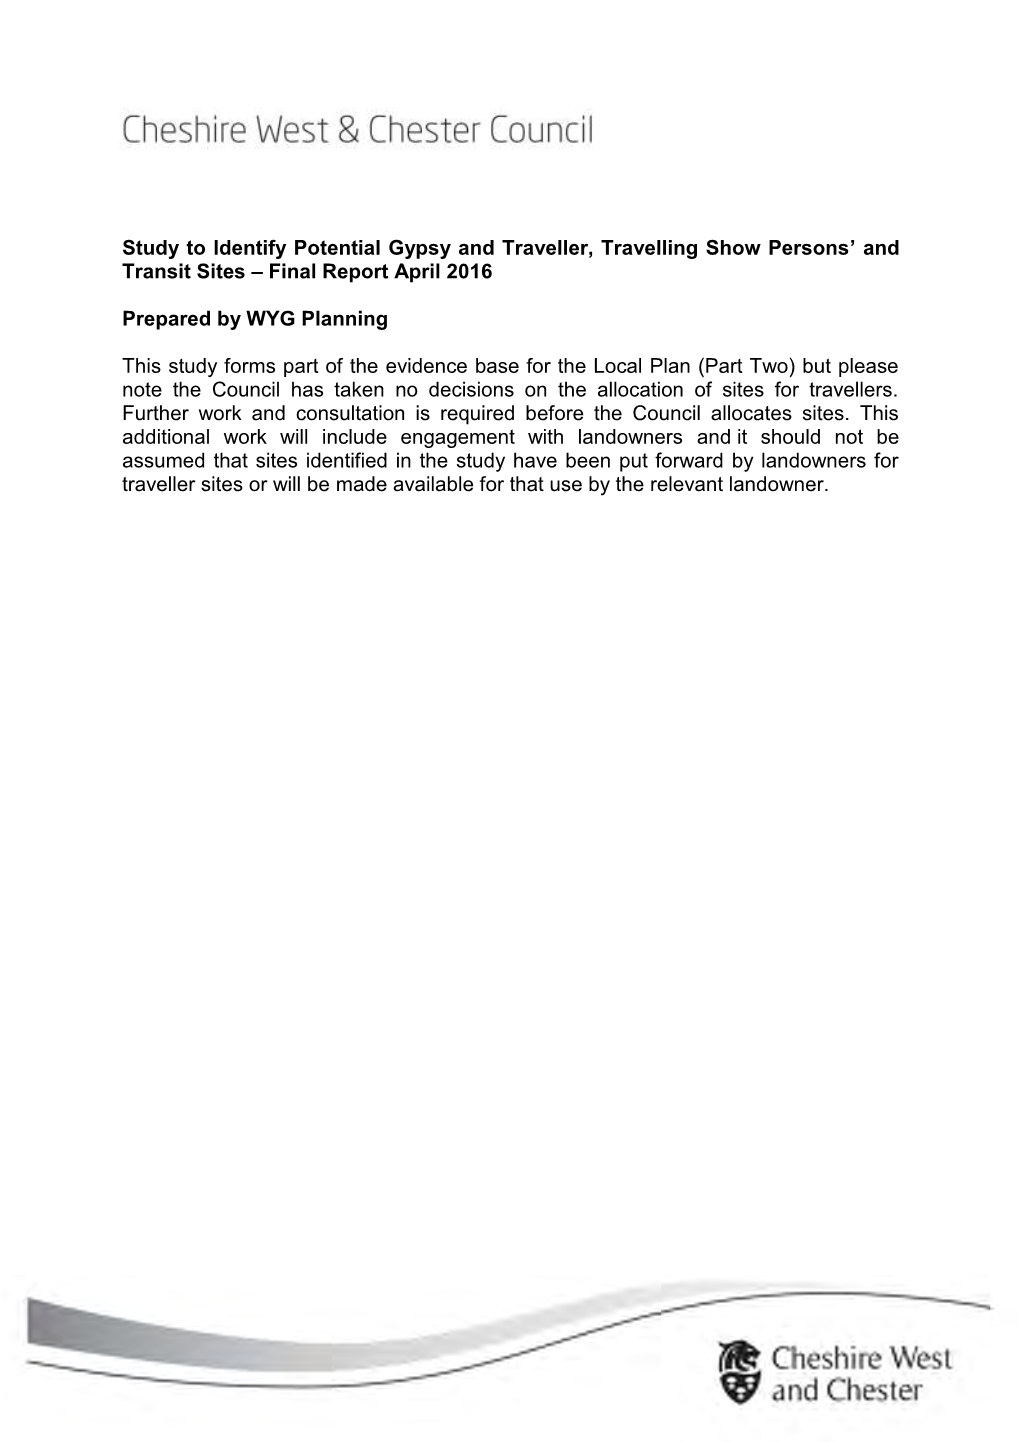 Study to Identify Potential Gypsy and Traveller, Travelling Show Persons’ and Transit Sites – Final Report April 2016